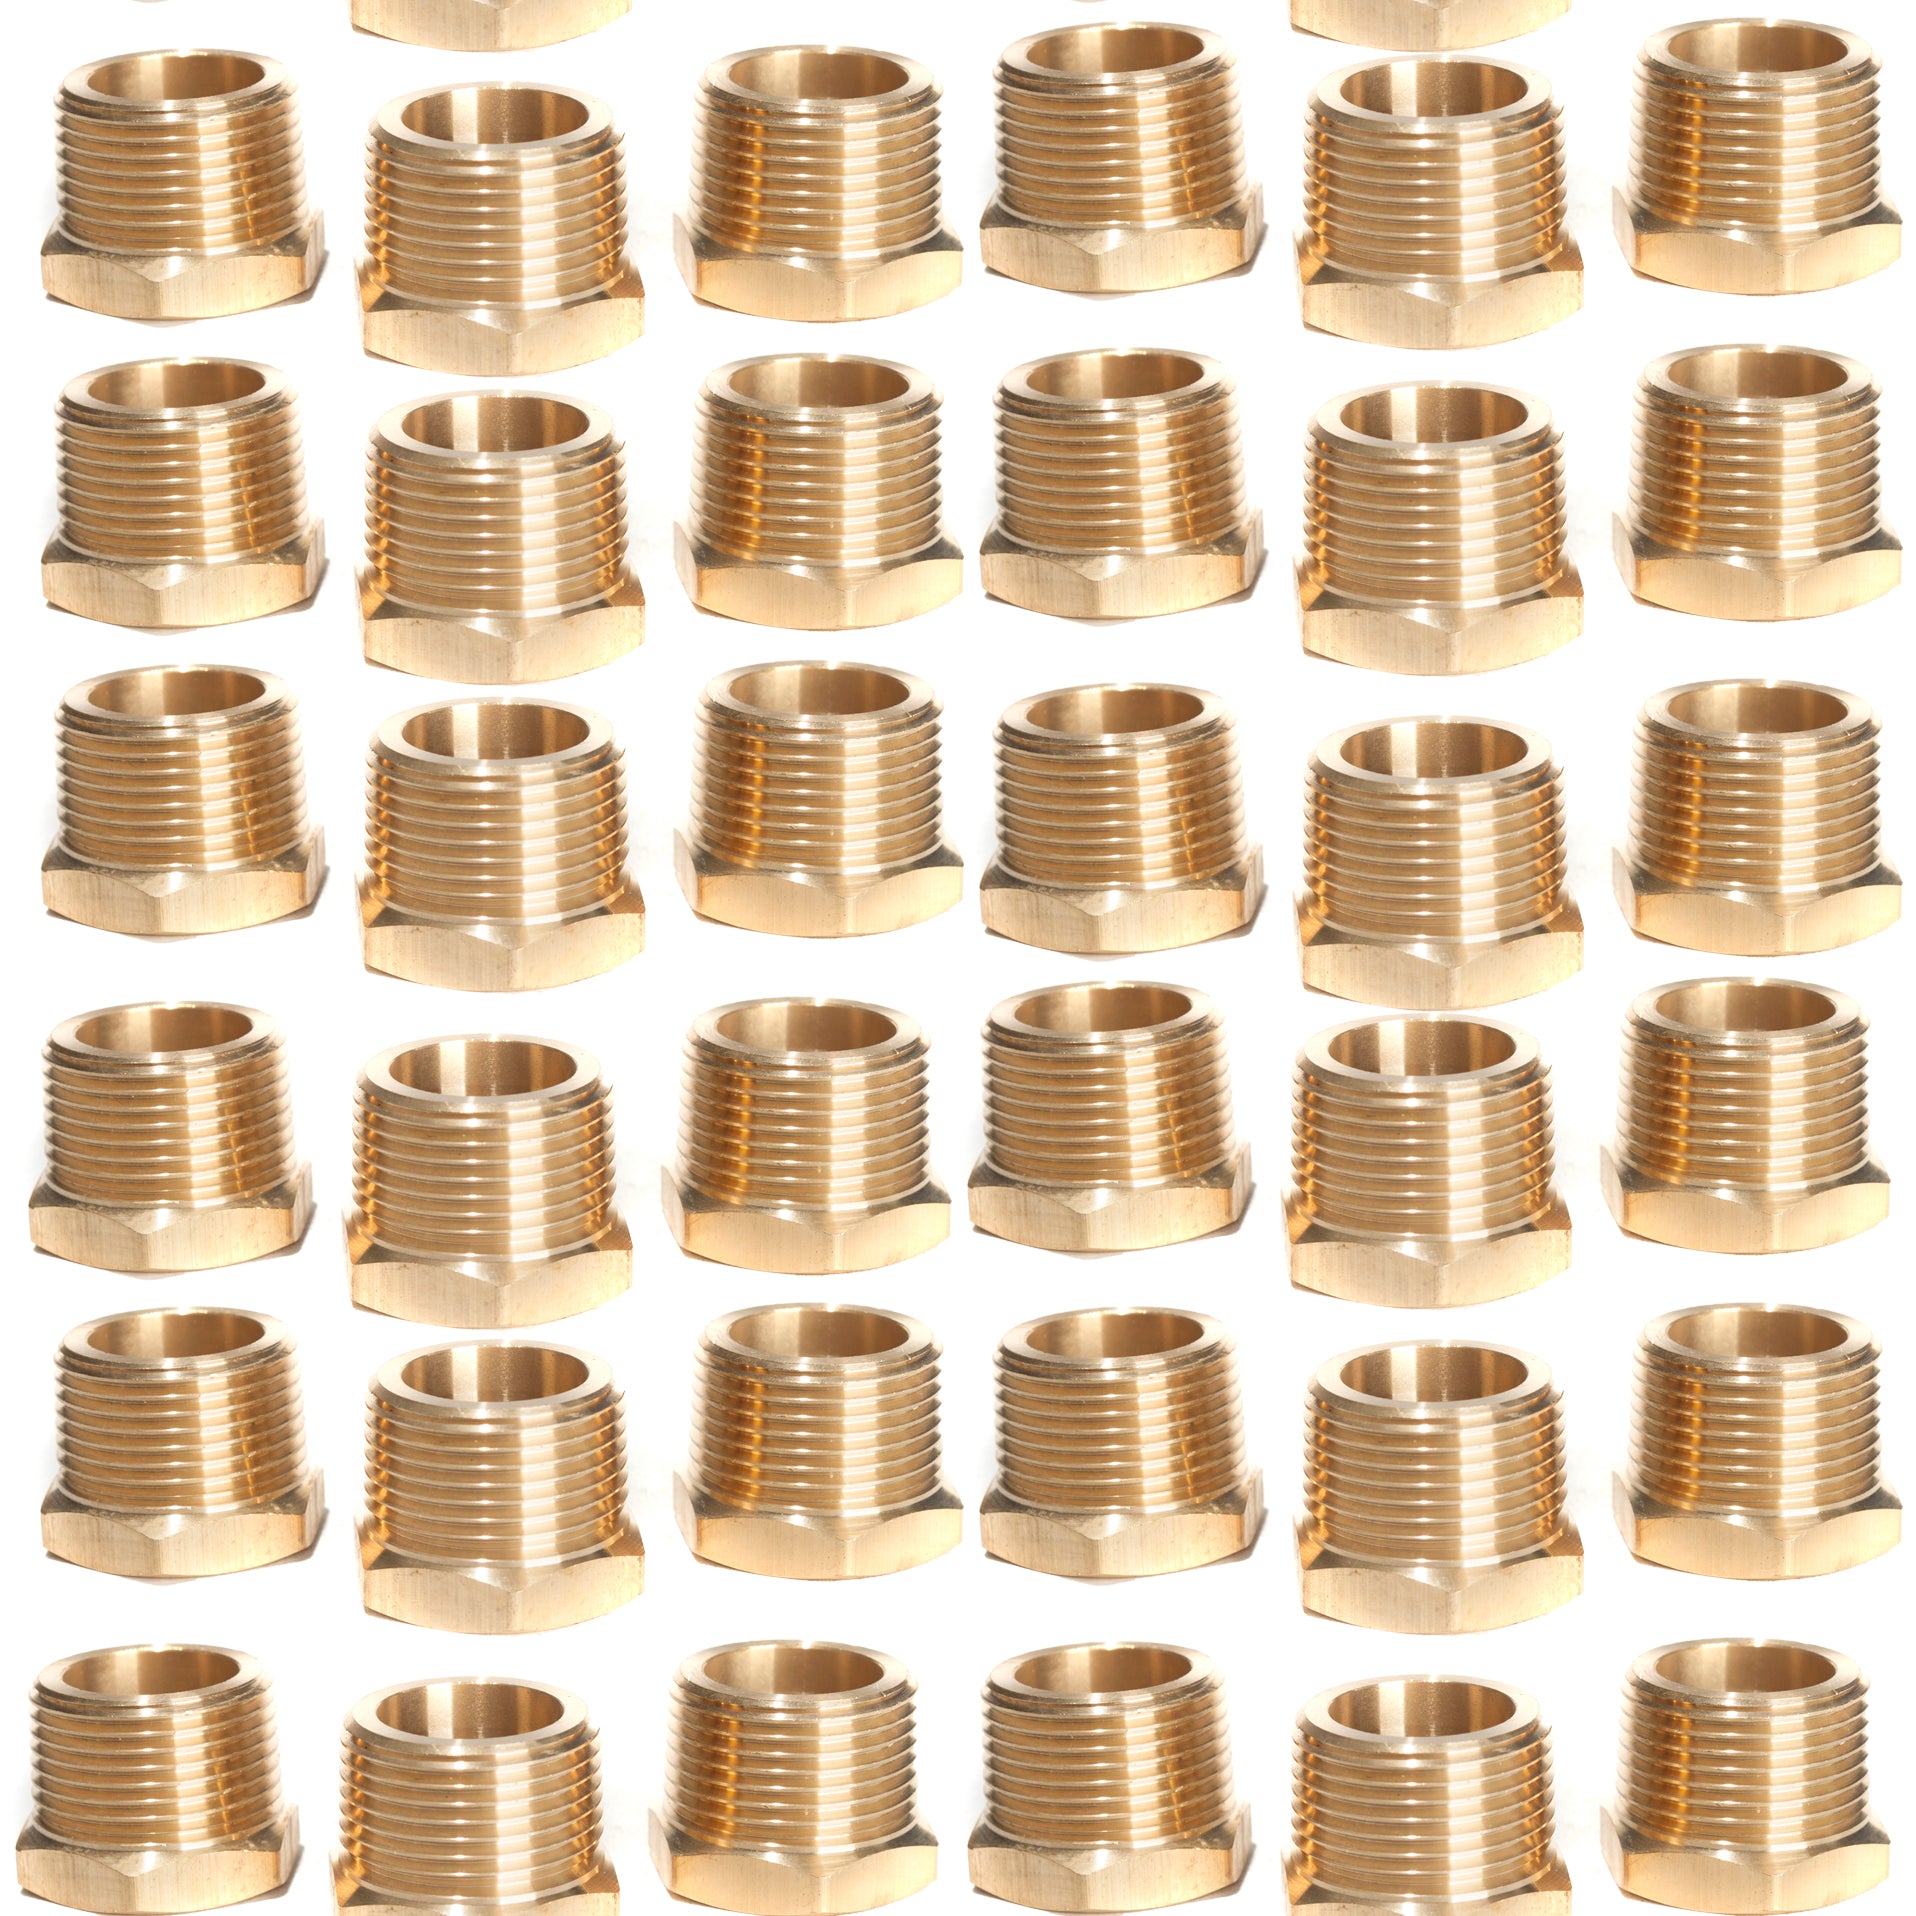 LTWFITTING Brass Pipe Hex Bushing Reducer Fittings 1 Inch Male x 3/4 Inch Female NPT Fuel(Pack of 70)